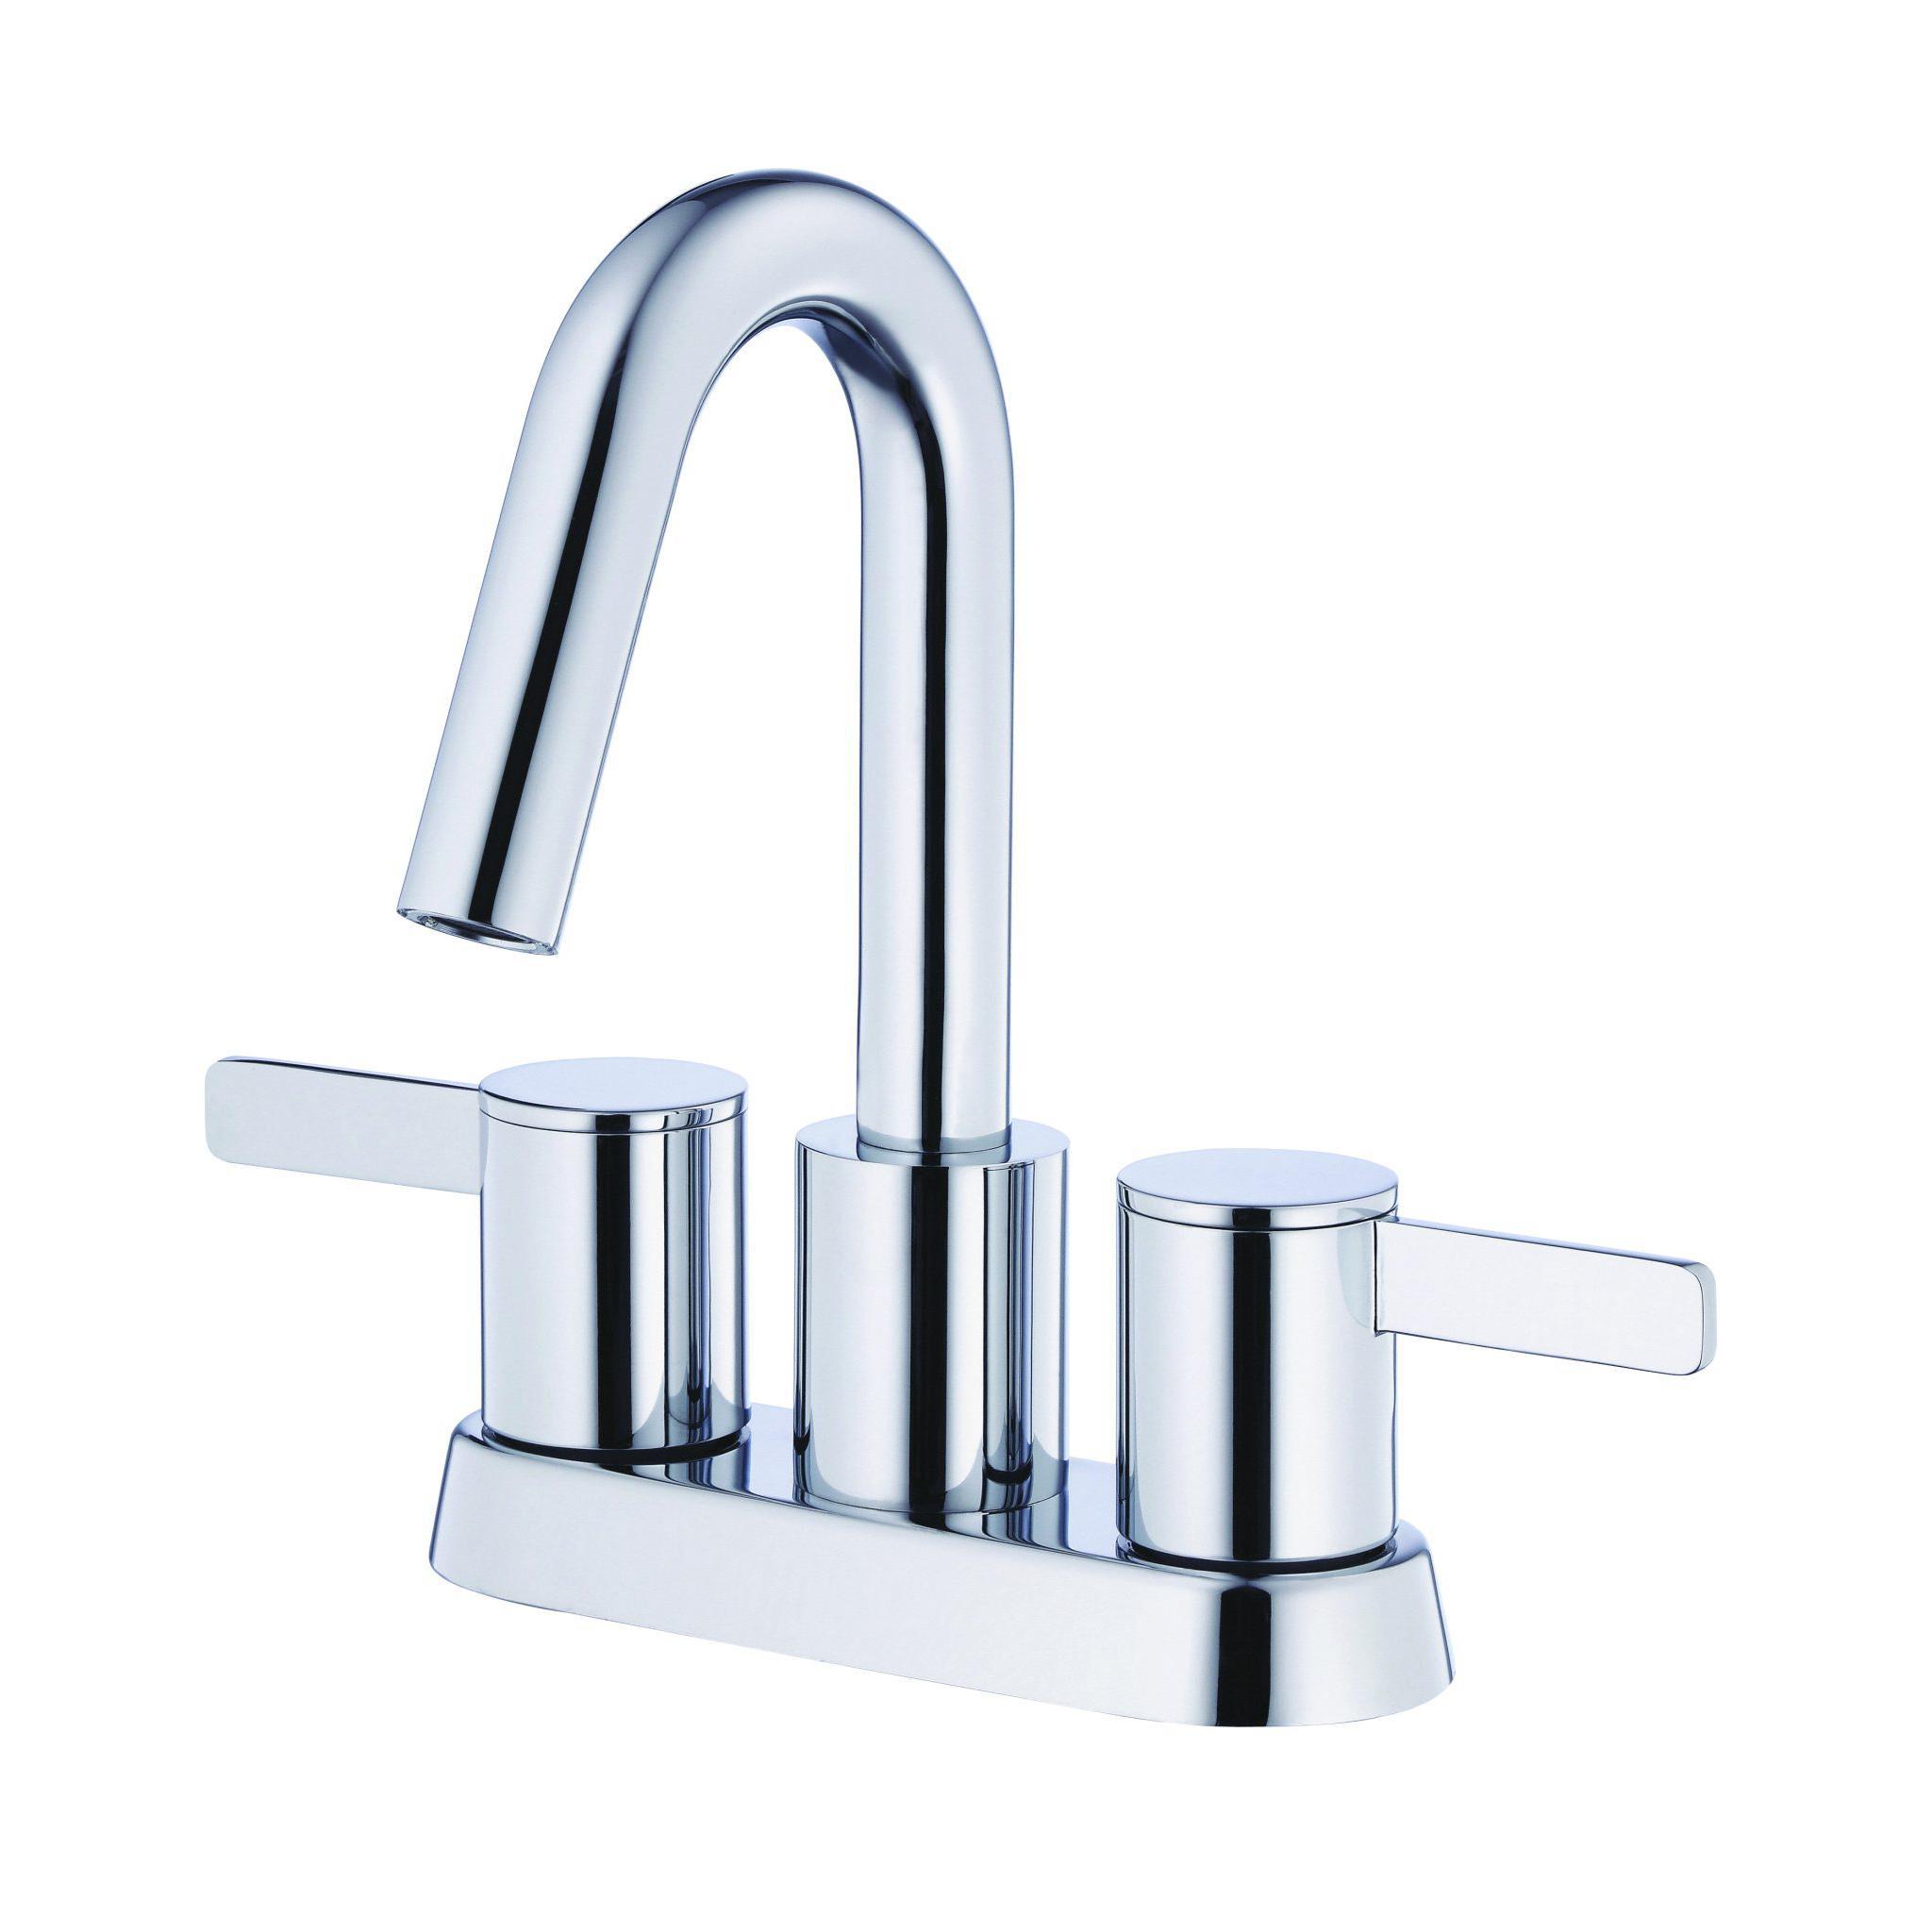 Image of the Gerber Amalfi faucet home builders can earn rebates on.